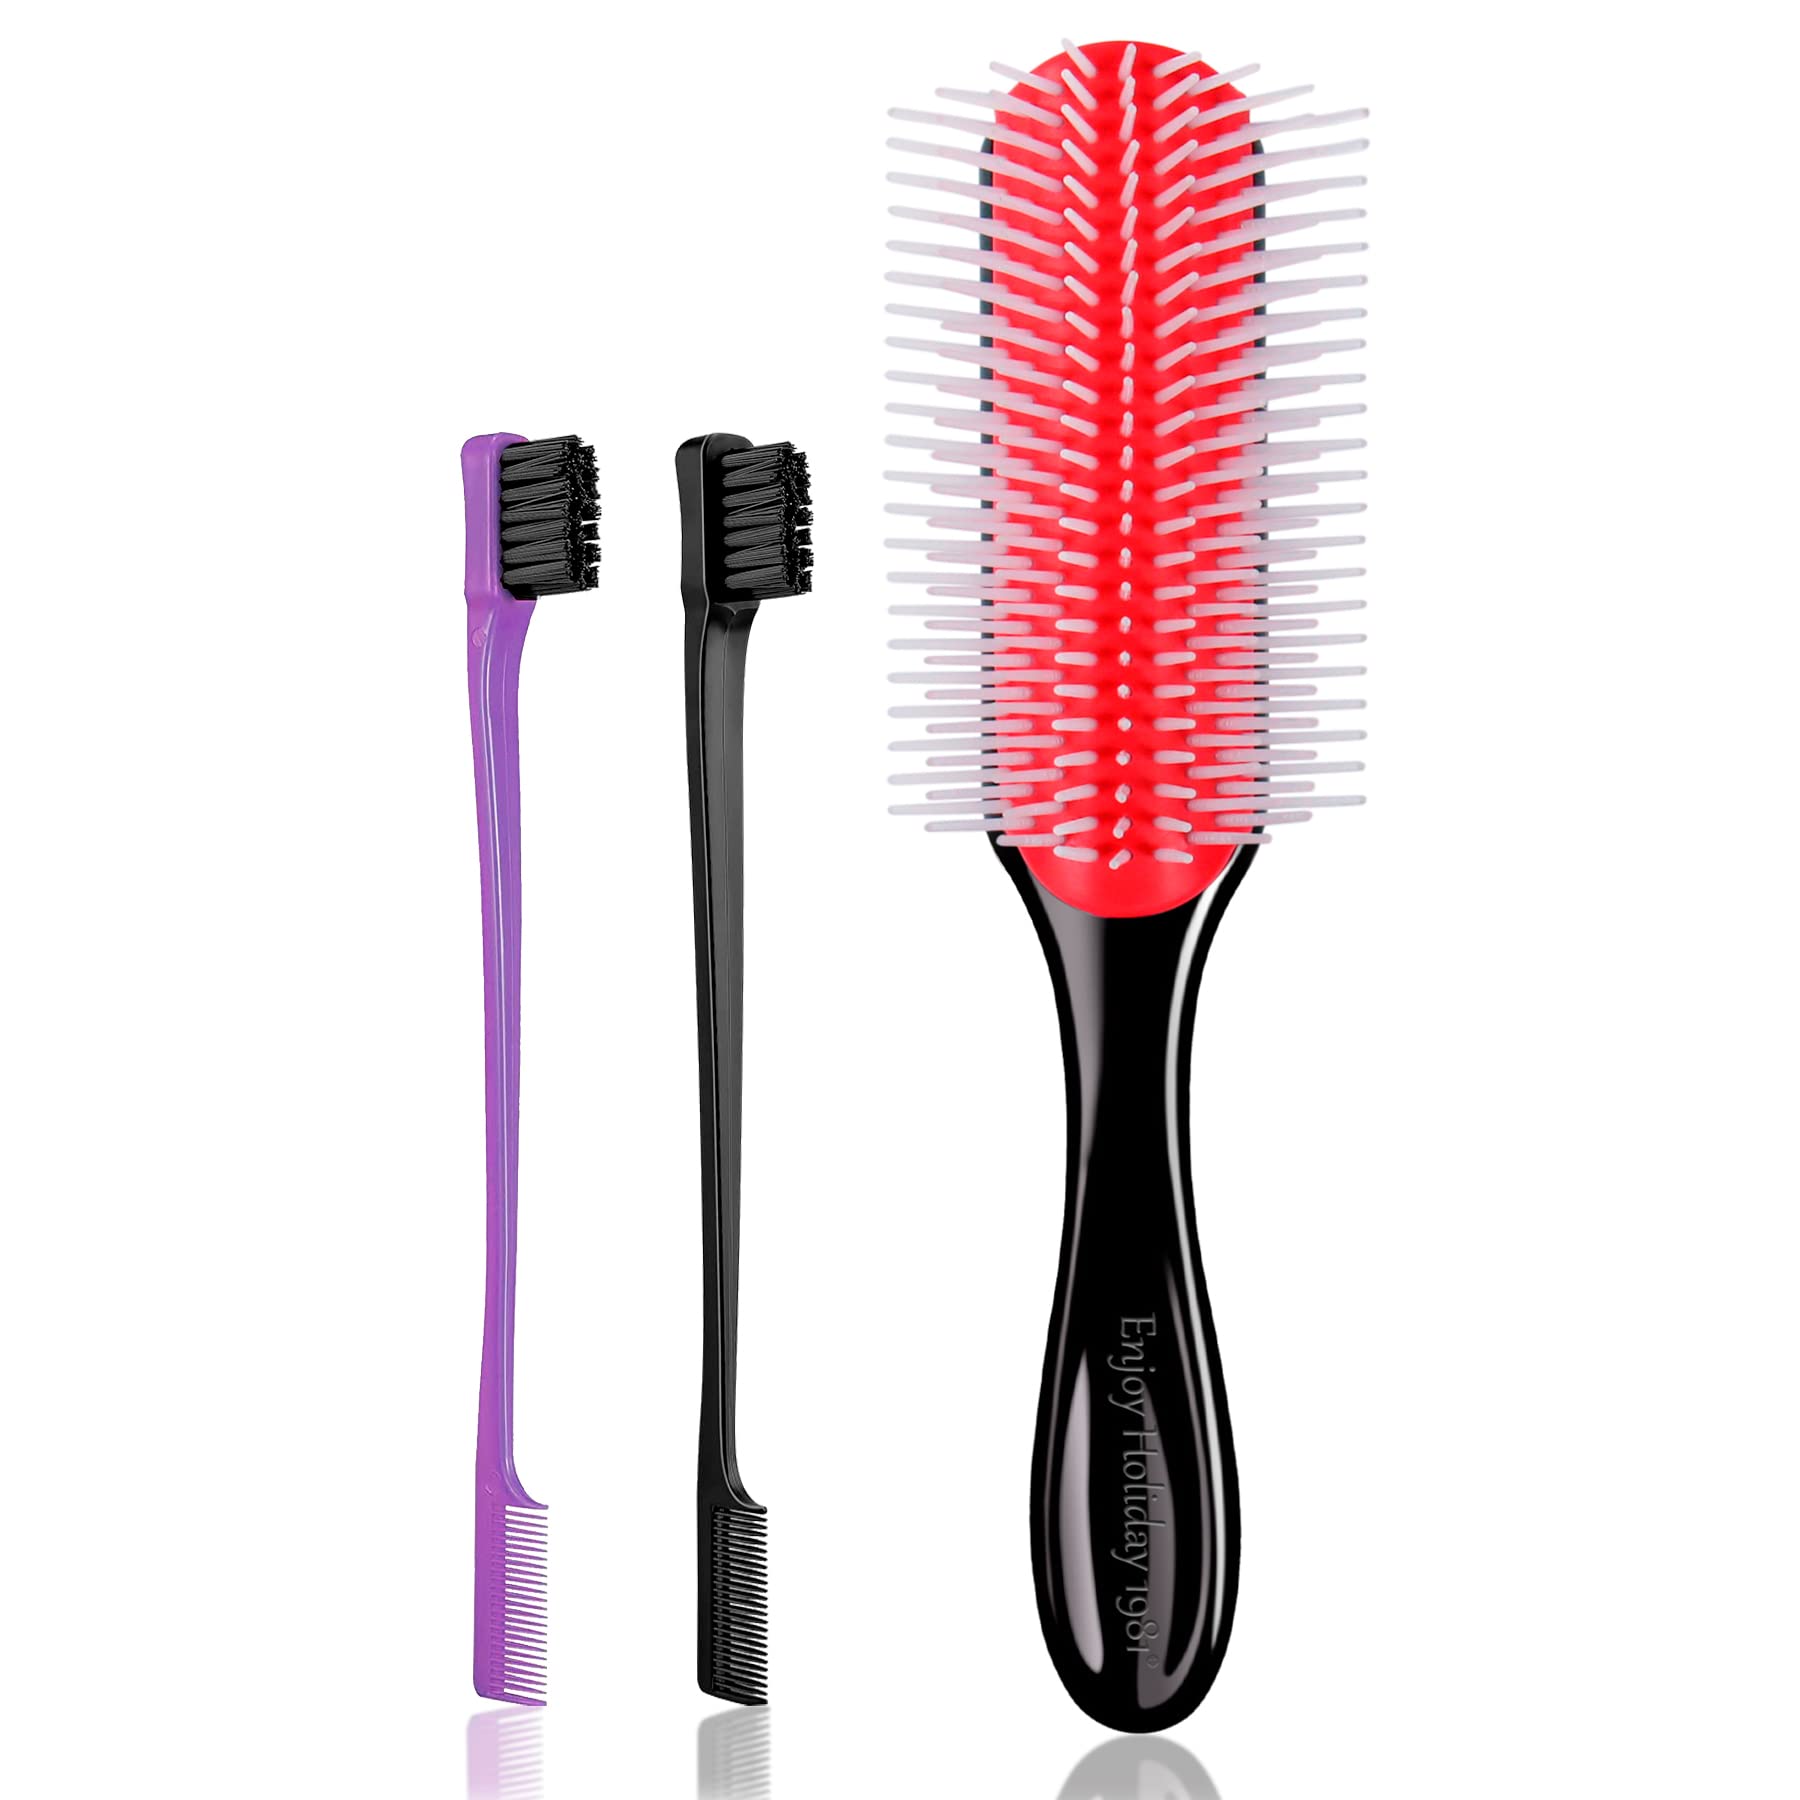 Book Cover Hair Brush for Women Men Curly Wet or Dry Hair Classic Detangling Brushes 9 Row with Edge for Natural Thick Hair, Blow Styling Separating, Shaping Defining Curls Tools Travel Bristle Black Hairbrush 3 In 1